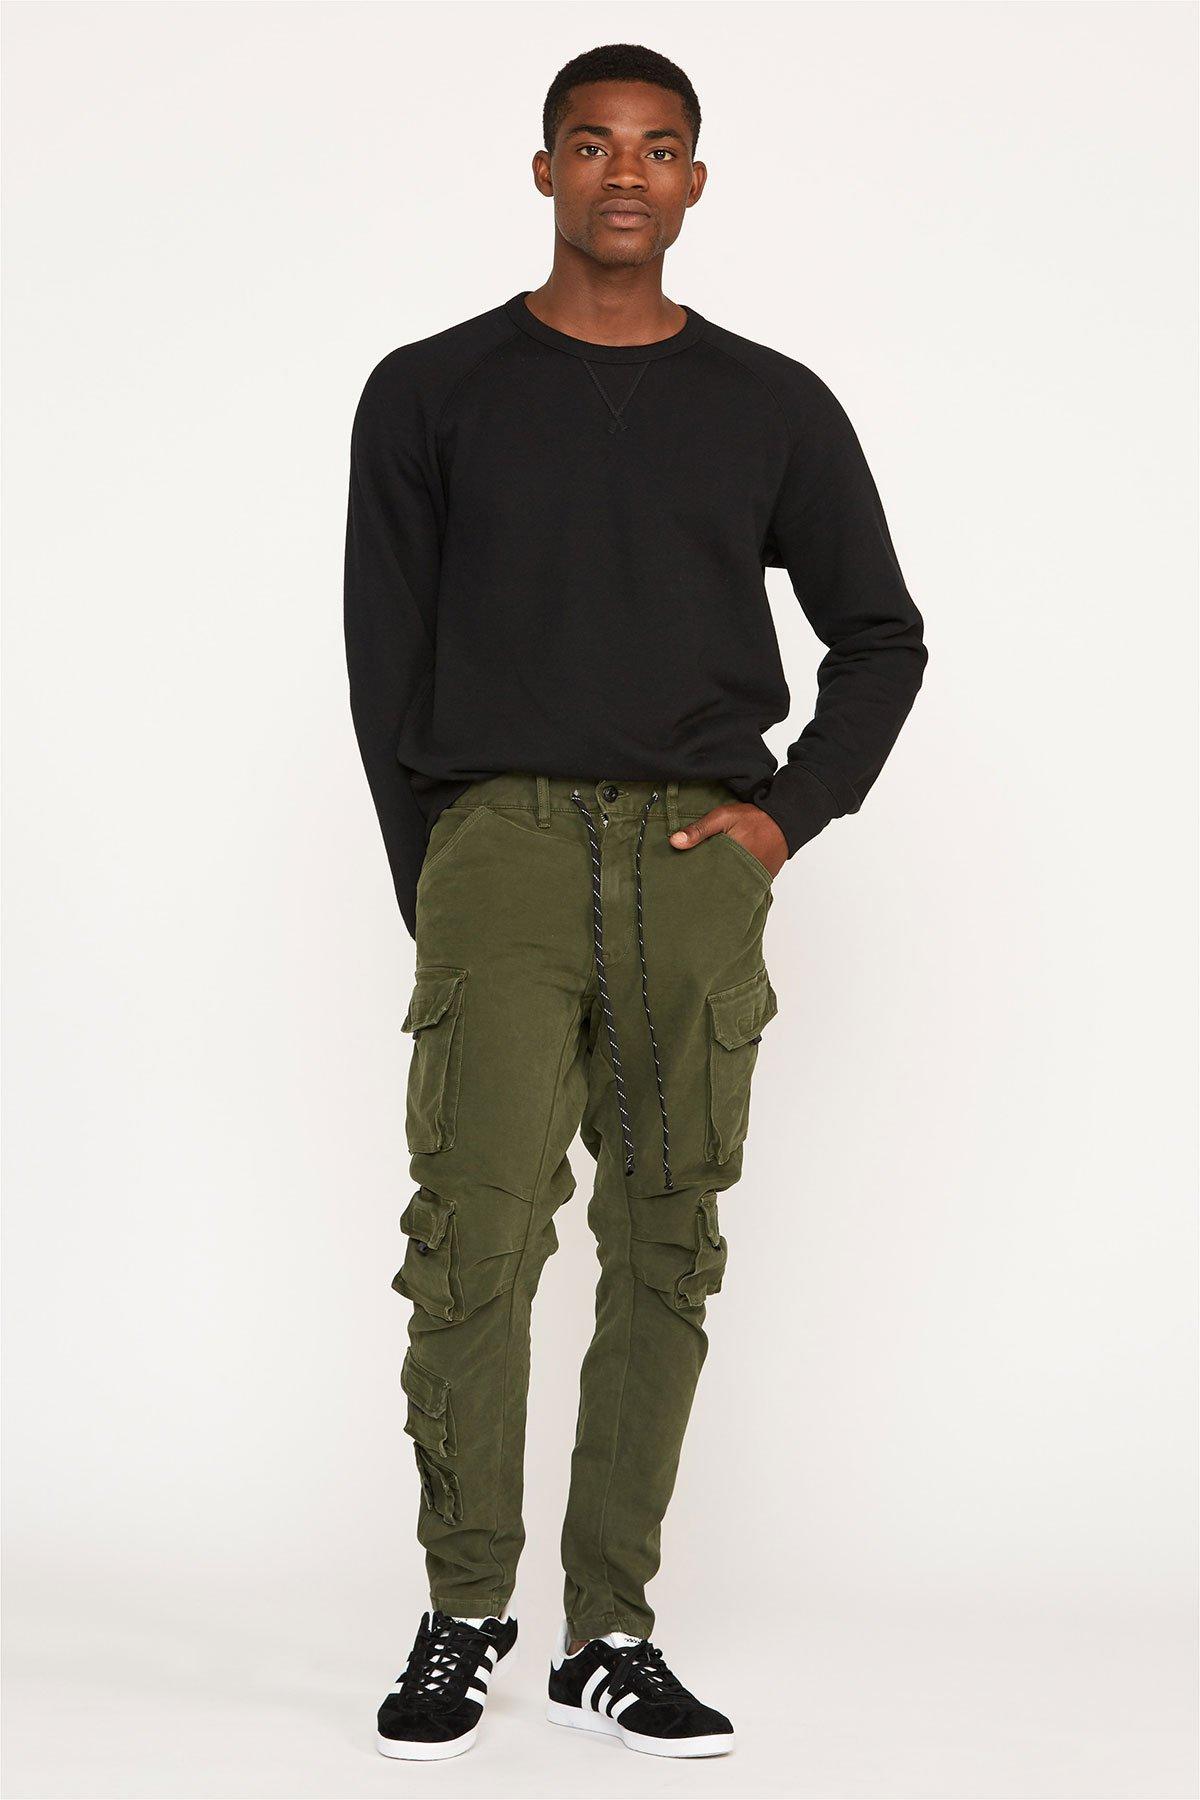 Hudson Jeans Cotton Bow Legged Cargo Pant in Forest (Green) for Men - Lyst